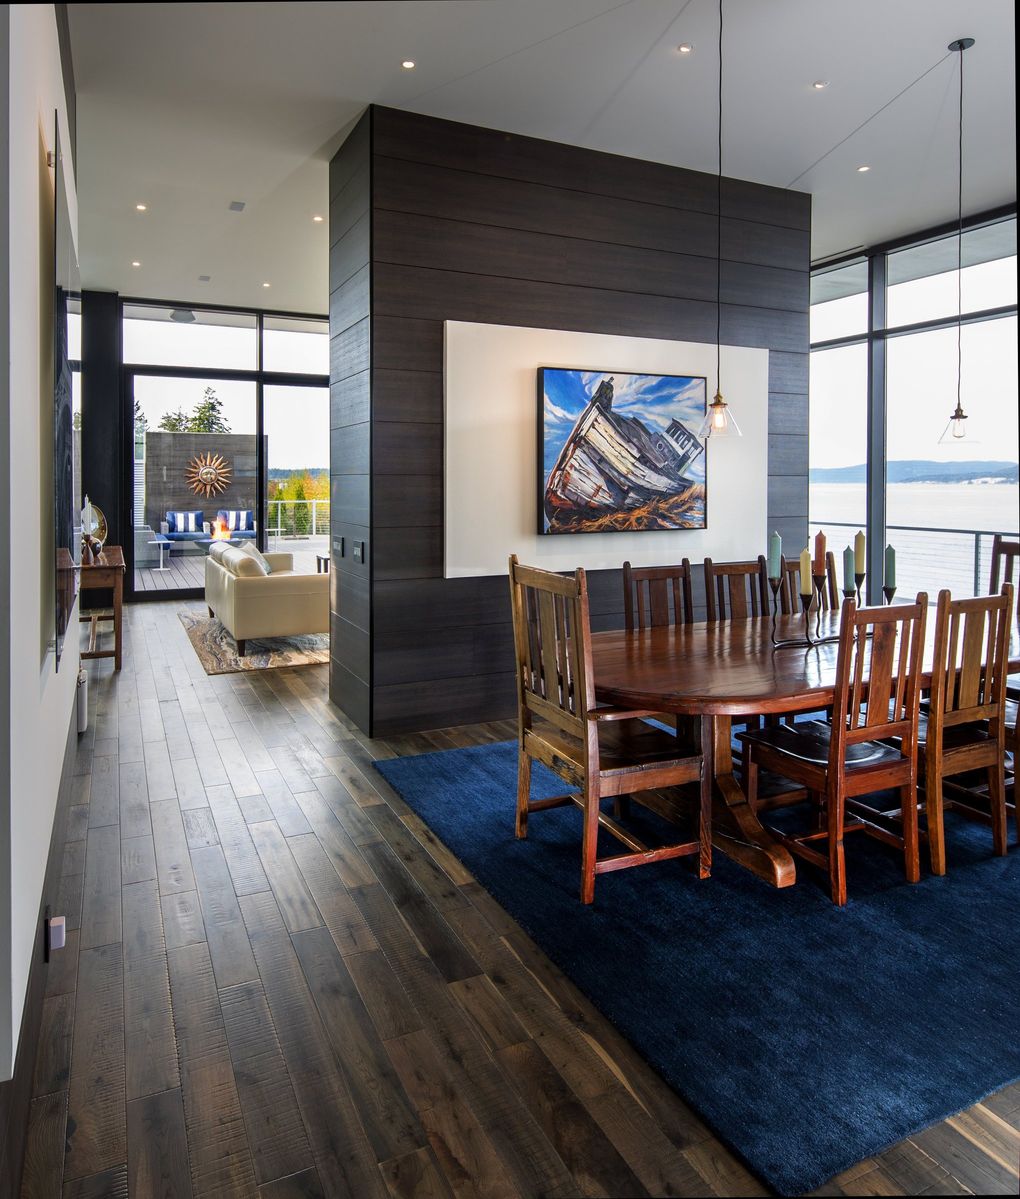 The dining and living areas of The Cliff House in Anacortes are separated by a wall that frames a painting of a shipwreck on Sheetrock, which pops out from CLEAF paneling made in Italy, says architect Brooks Middleton. The paneling also shows up on the kitchen cabinets, but in a different color. (Mike Siegel / The Seattle Times, 2018)